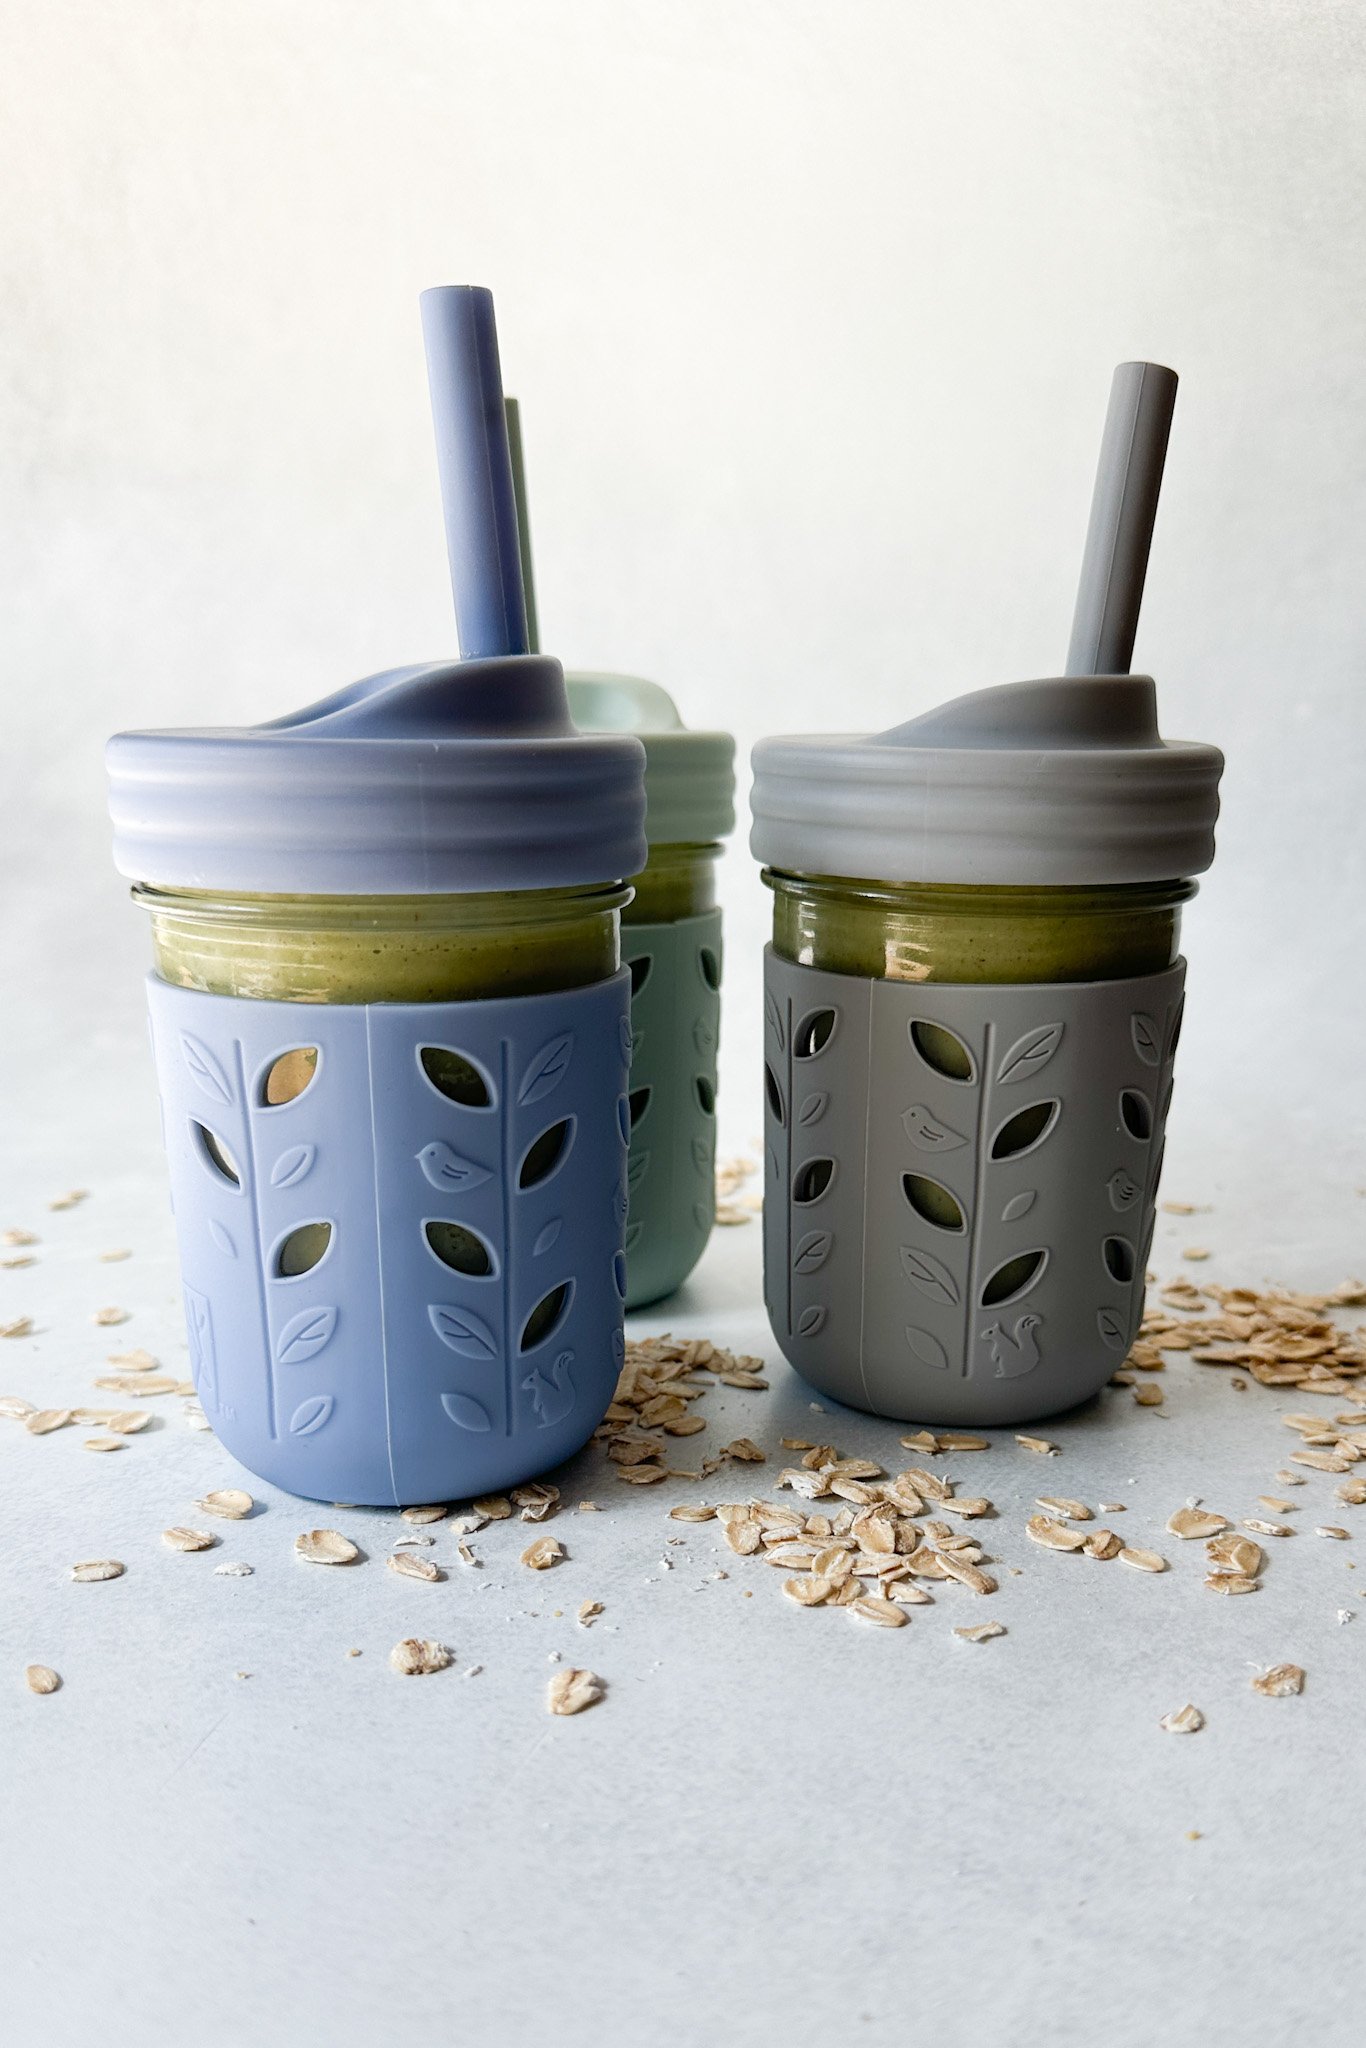 Spinach banana smoothies in toddler glass tumblers with silicone sleeves.